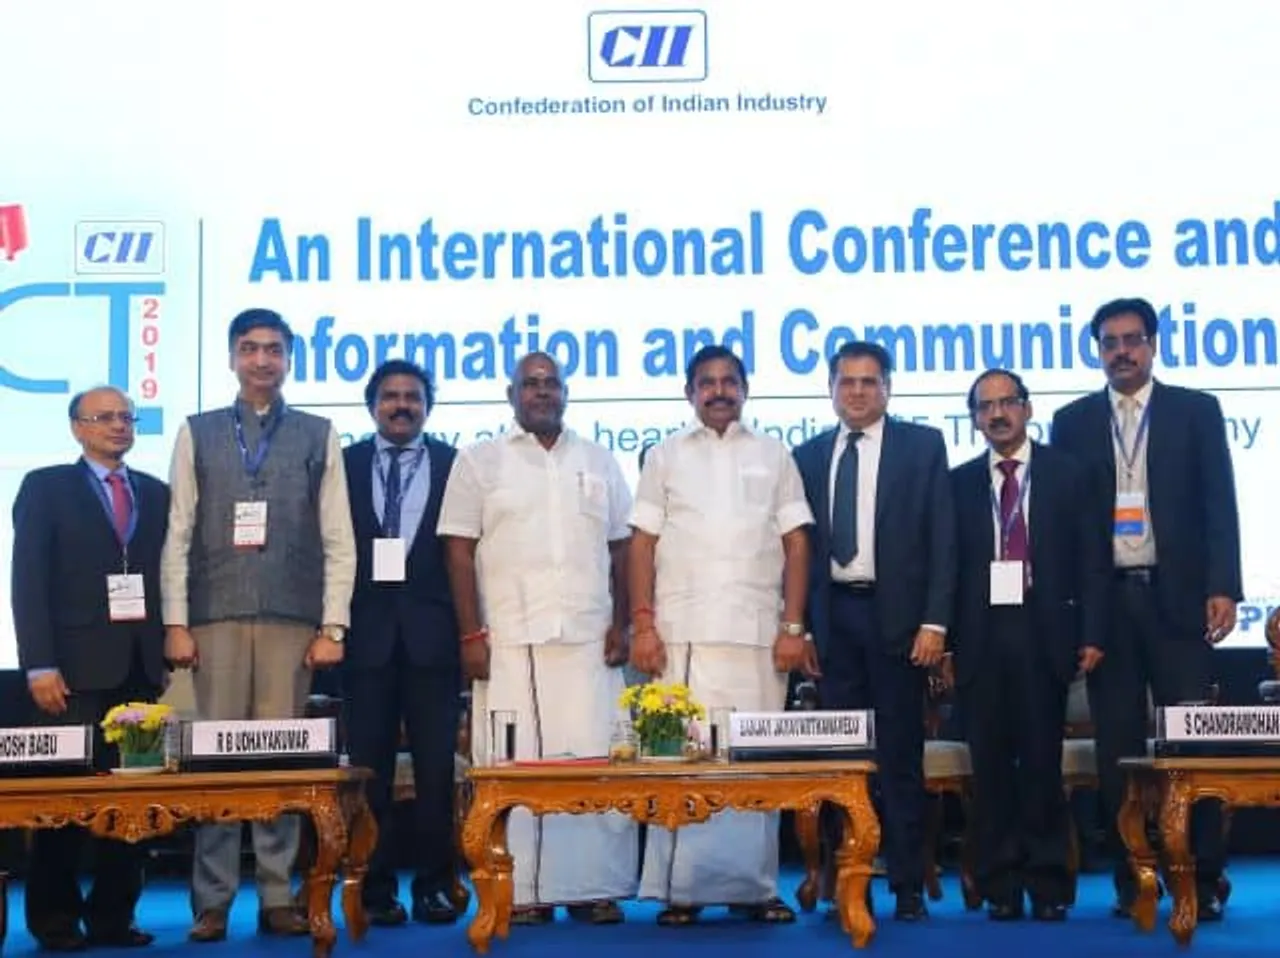 CII CONNECT at Chennai showed Tamil Nadu's ICT industry